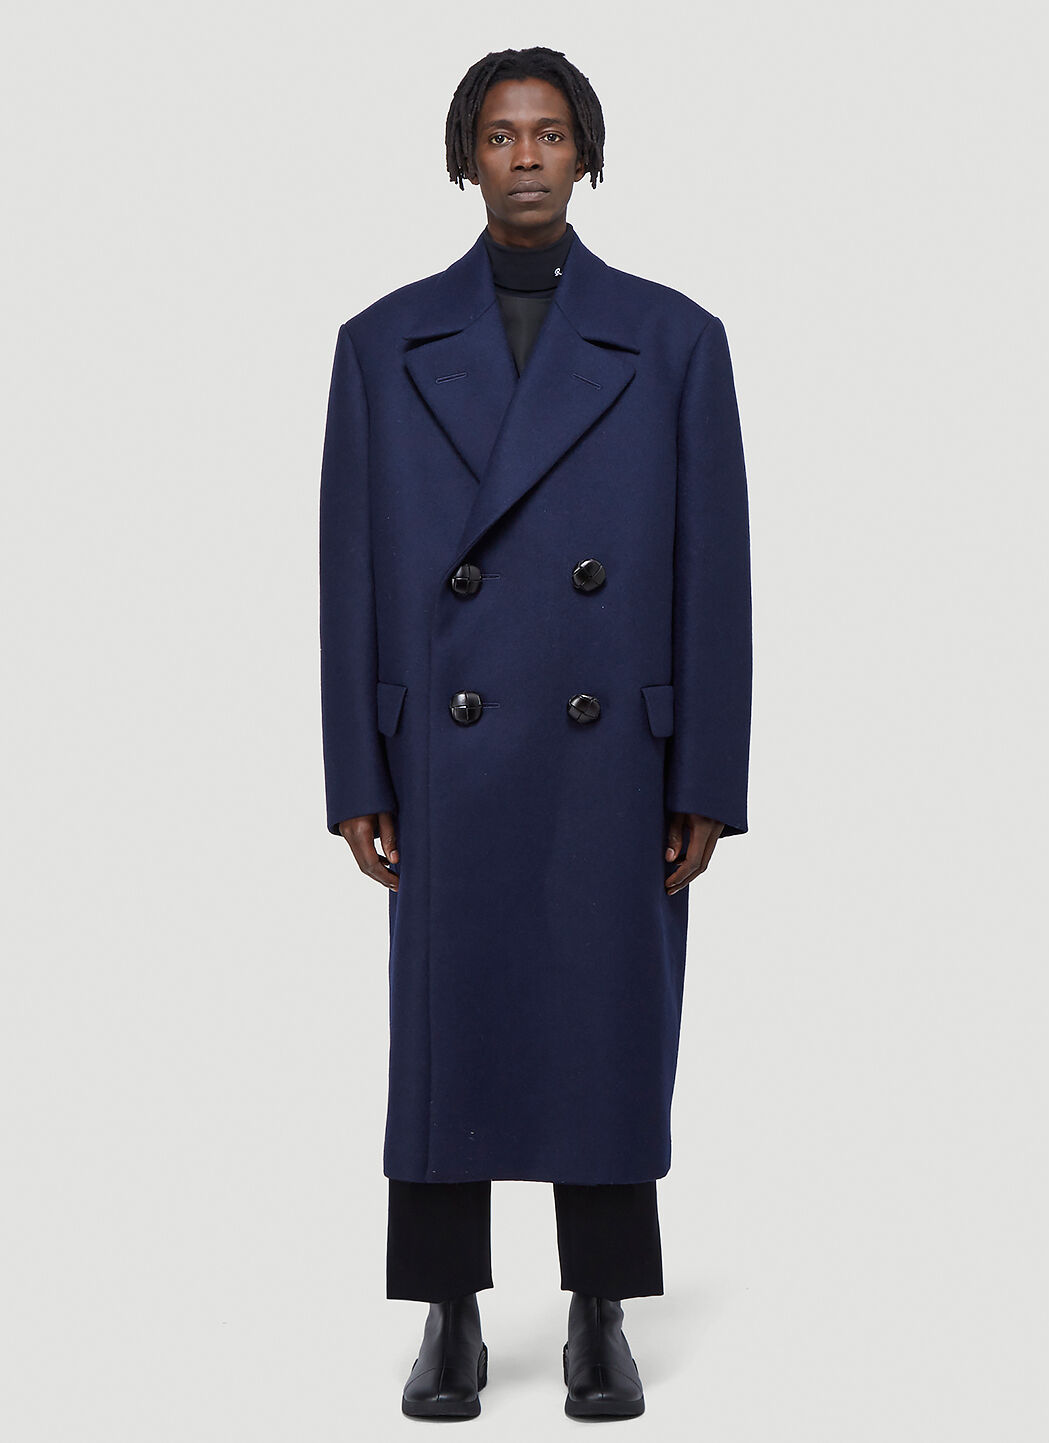 Raf Simons x Fred Perry Oversized Double-Breasted Coat Black rsf0152002